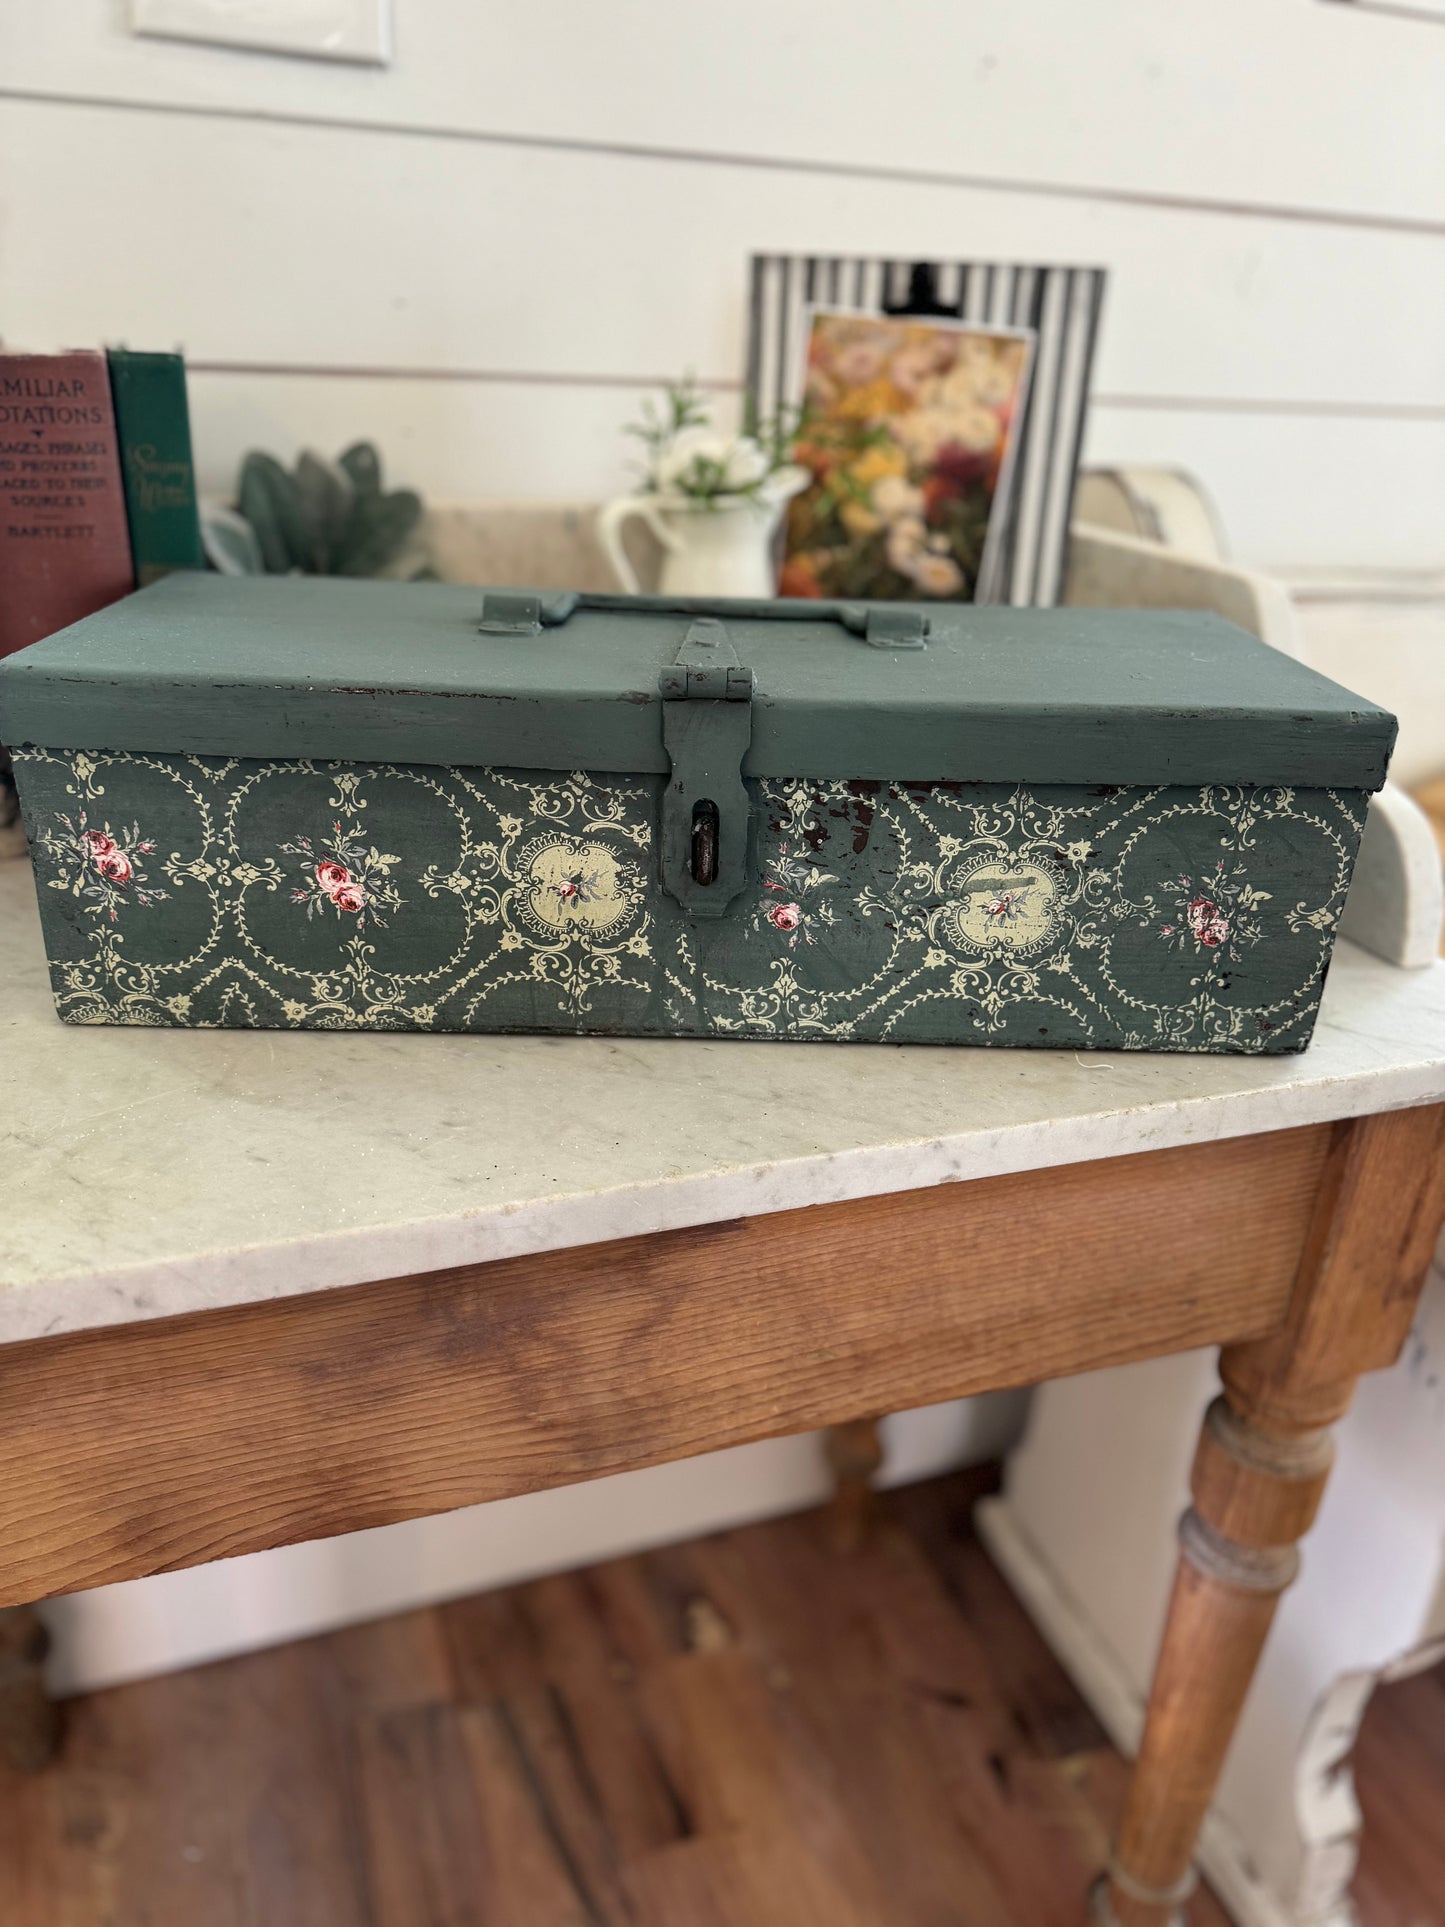 Chippy Painted Antique tool box - heavy gauge